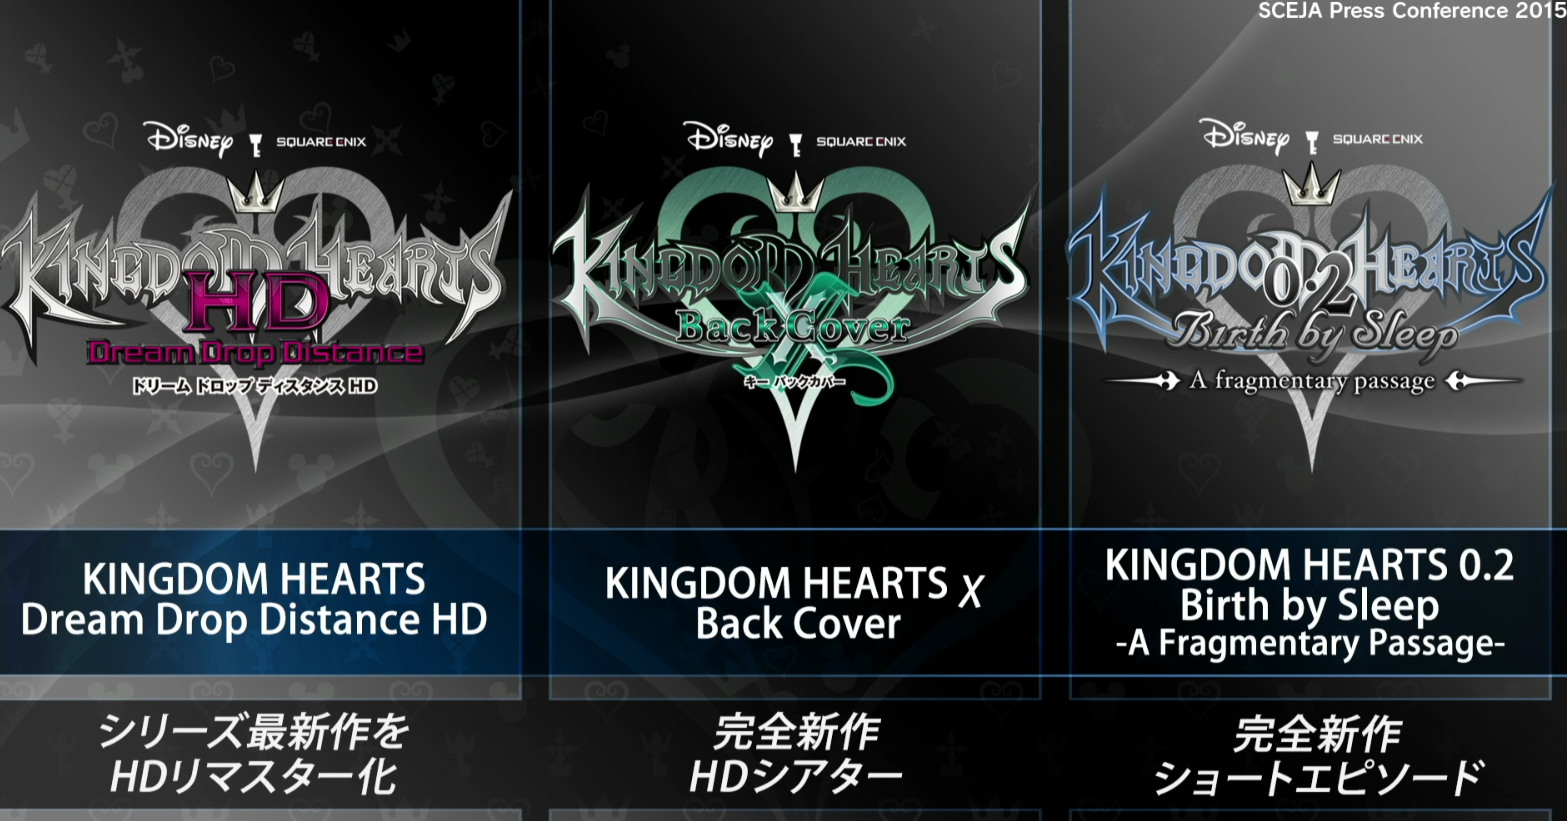 Kingdom Hearts 2.8 Announced for PS4